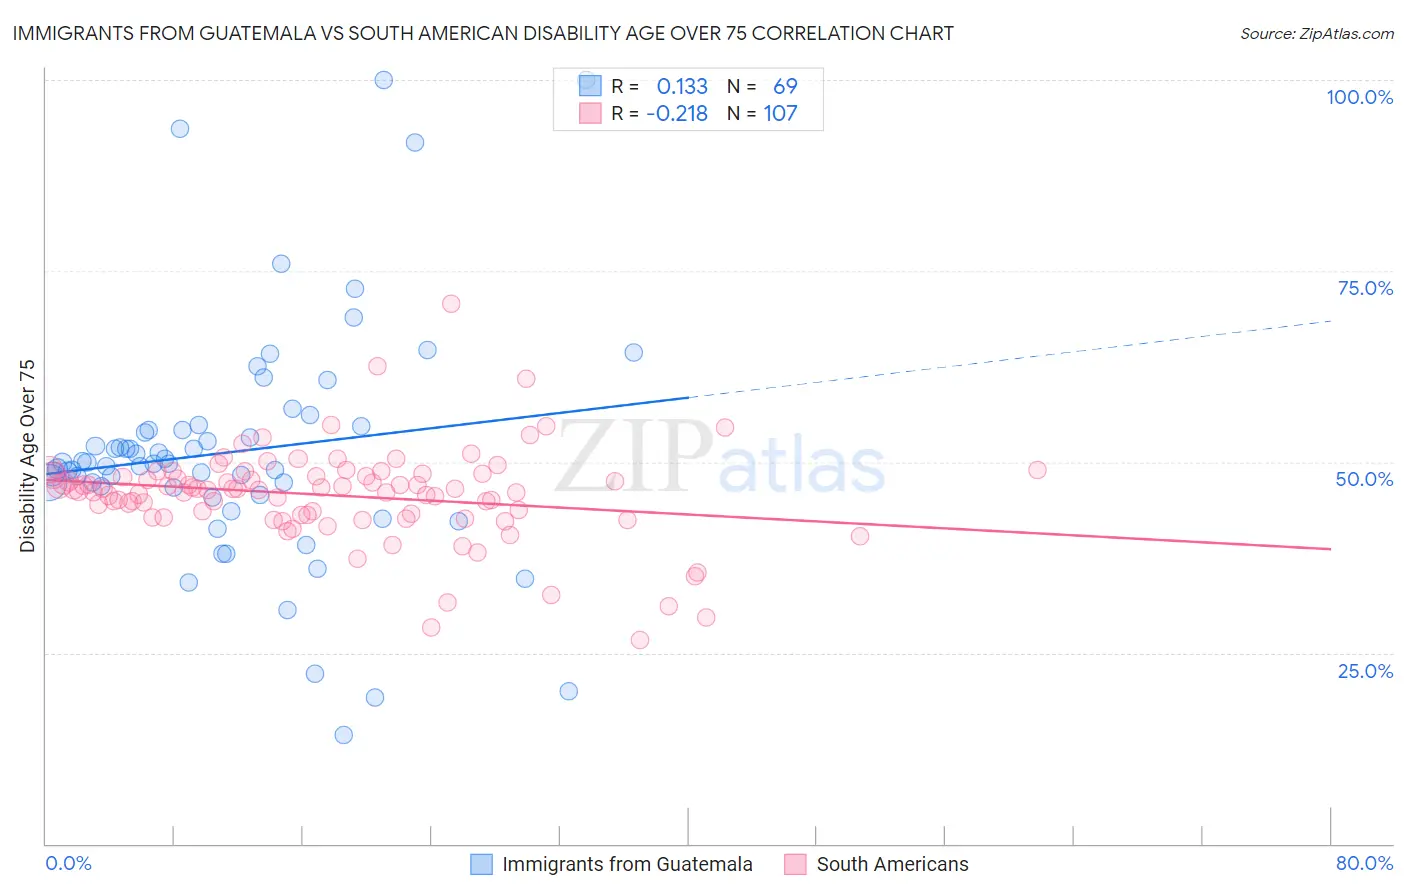 Immigrants from Guatemala vs South American Disability Age Over 75